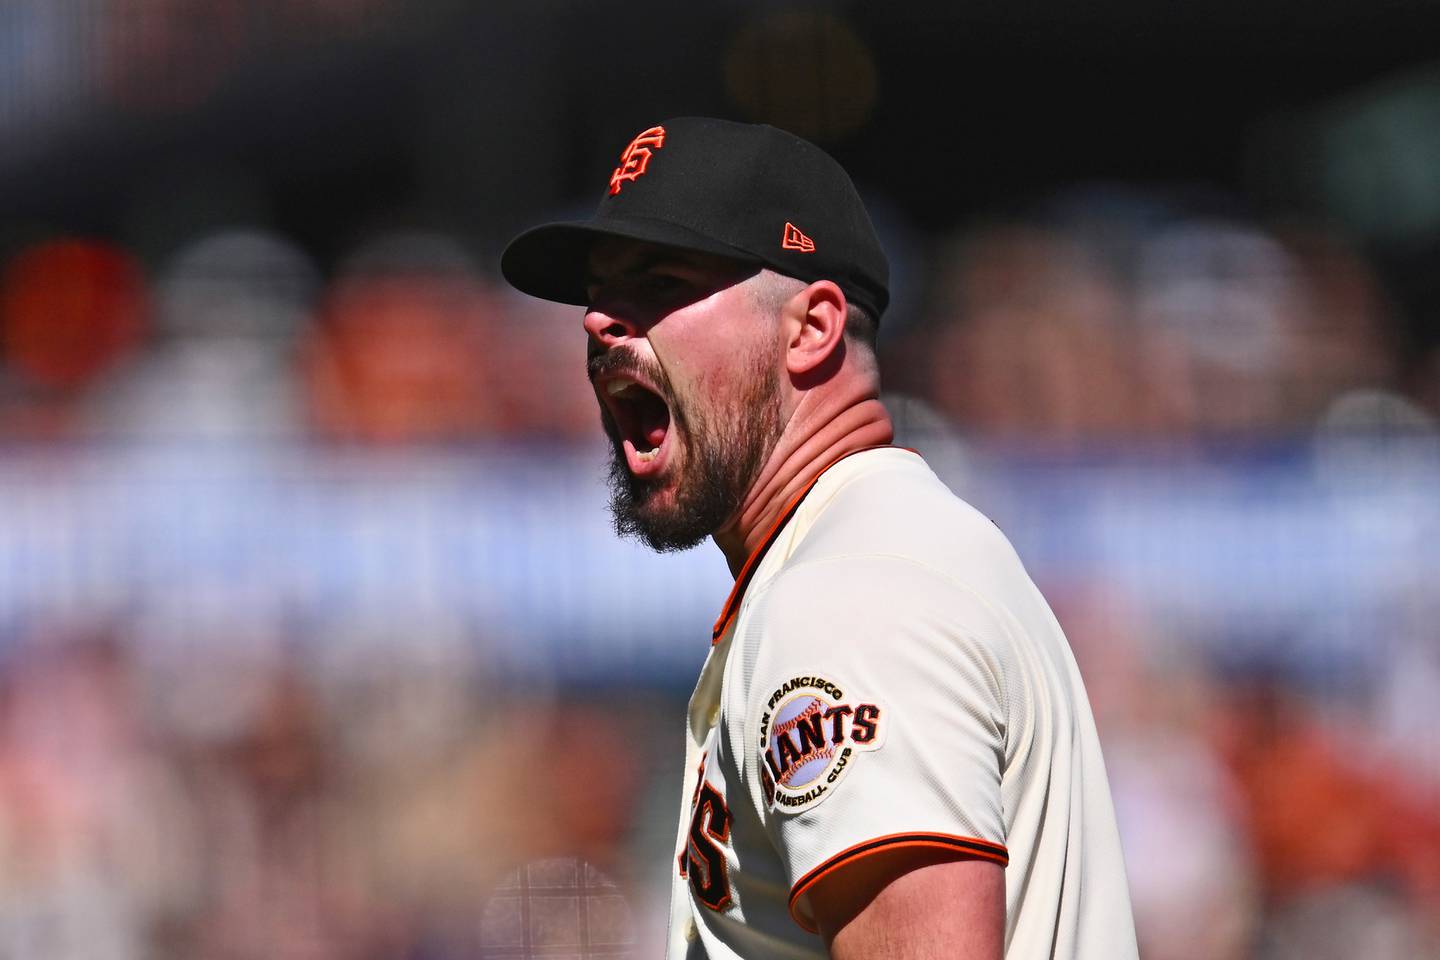 Giants pitcher Carlos Carlos Rodón reacts after striking out the Phillies' Bryson Stott in the sixth inning of a game on Sept. 4, 2022.